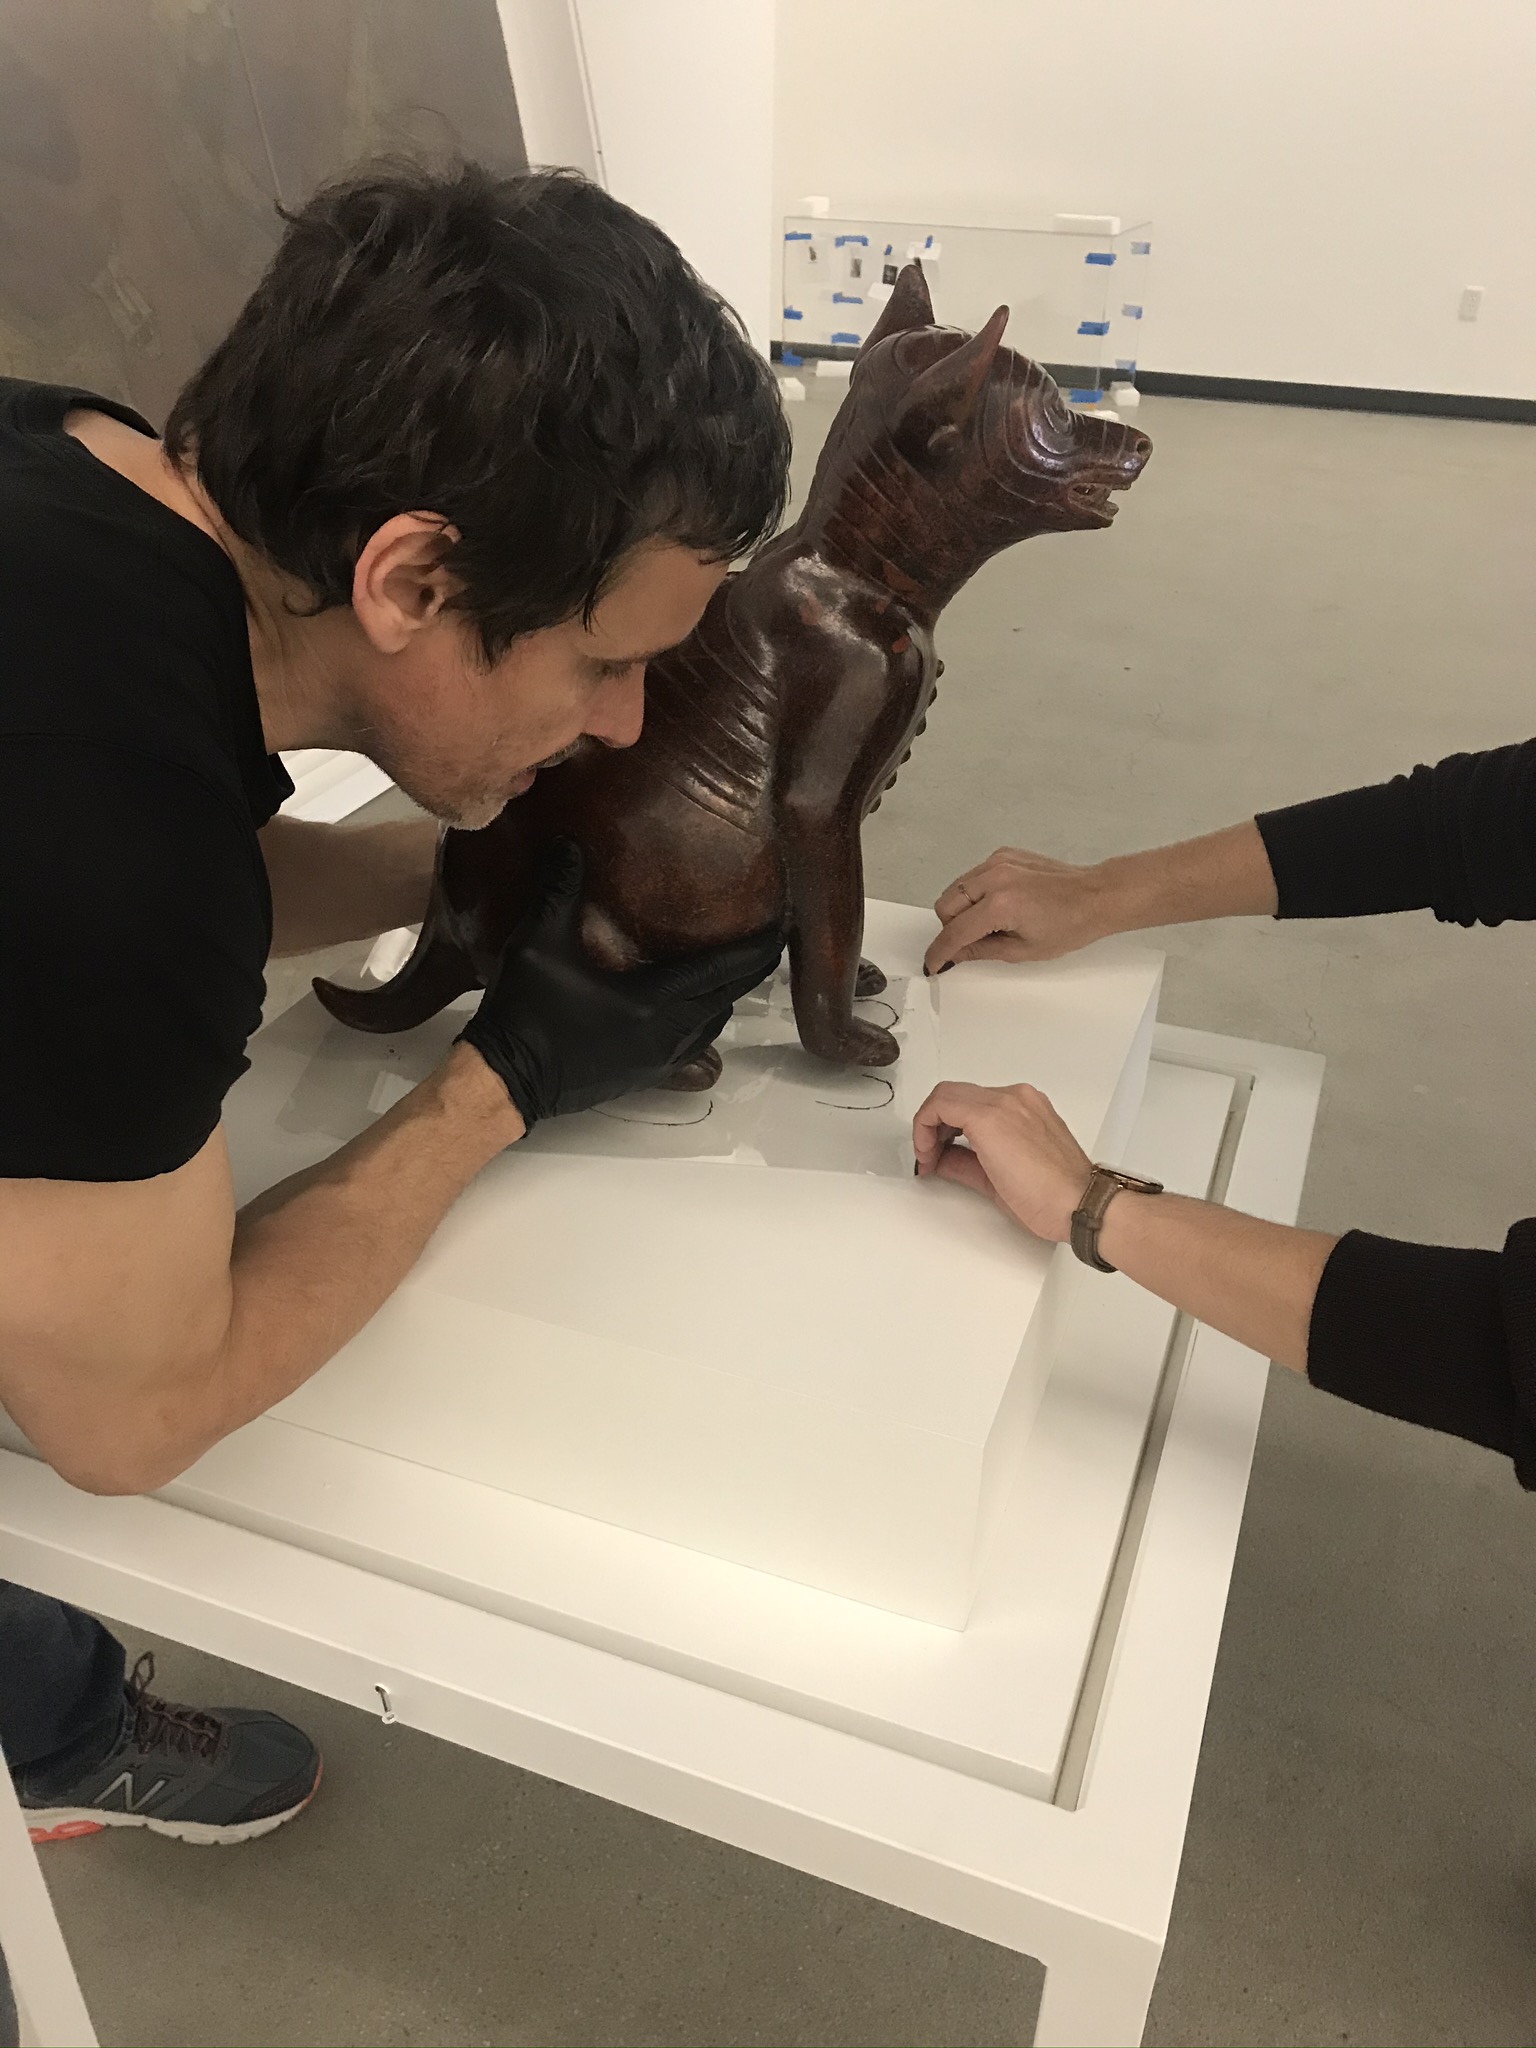 Dog, Mexico, Colima, 200 BCE–500 CE, Los Angeles County Museum of Art, The Proctor Stafford Collection, purchased with funds provided by Mr. and Mrs. Allan C. Balch. Giorgio Carlevaro, senior art preparator, installing the sculpture, photo courtesy of Dawn Turner